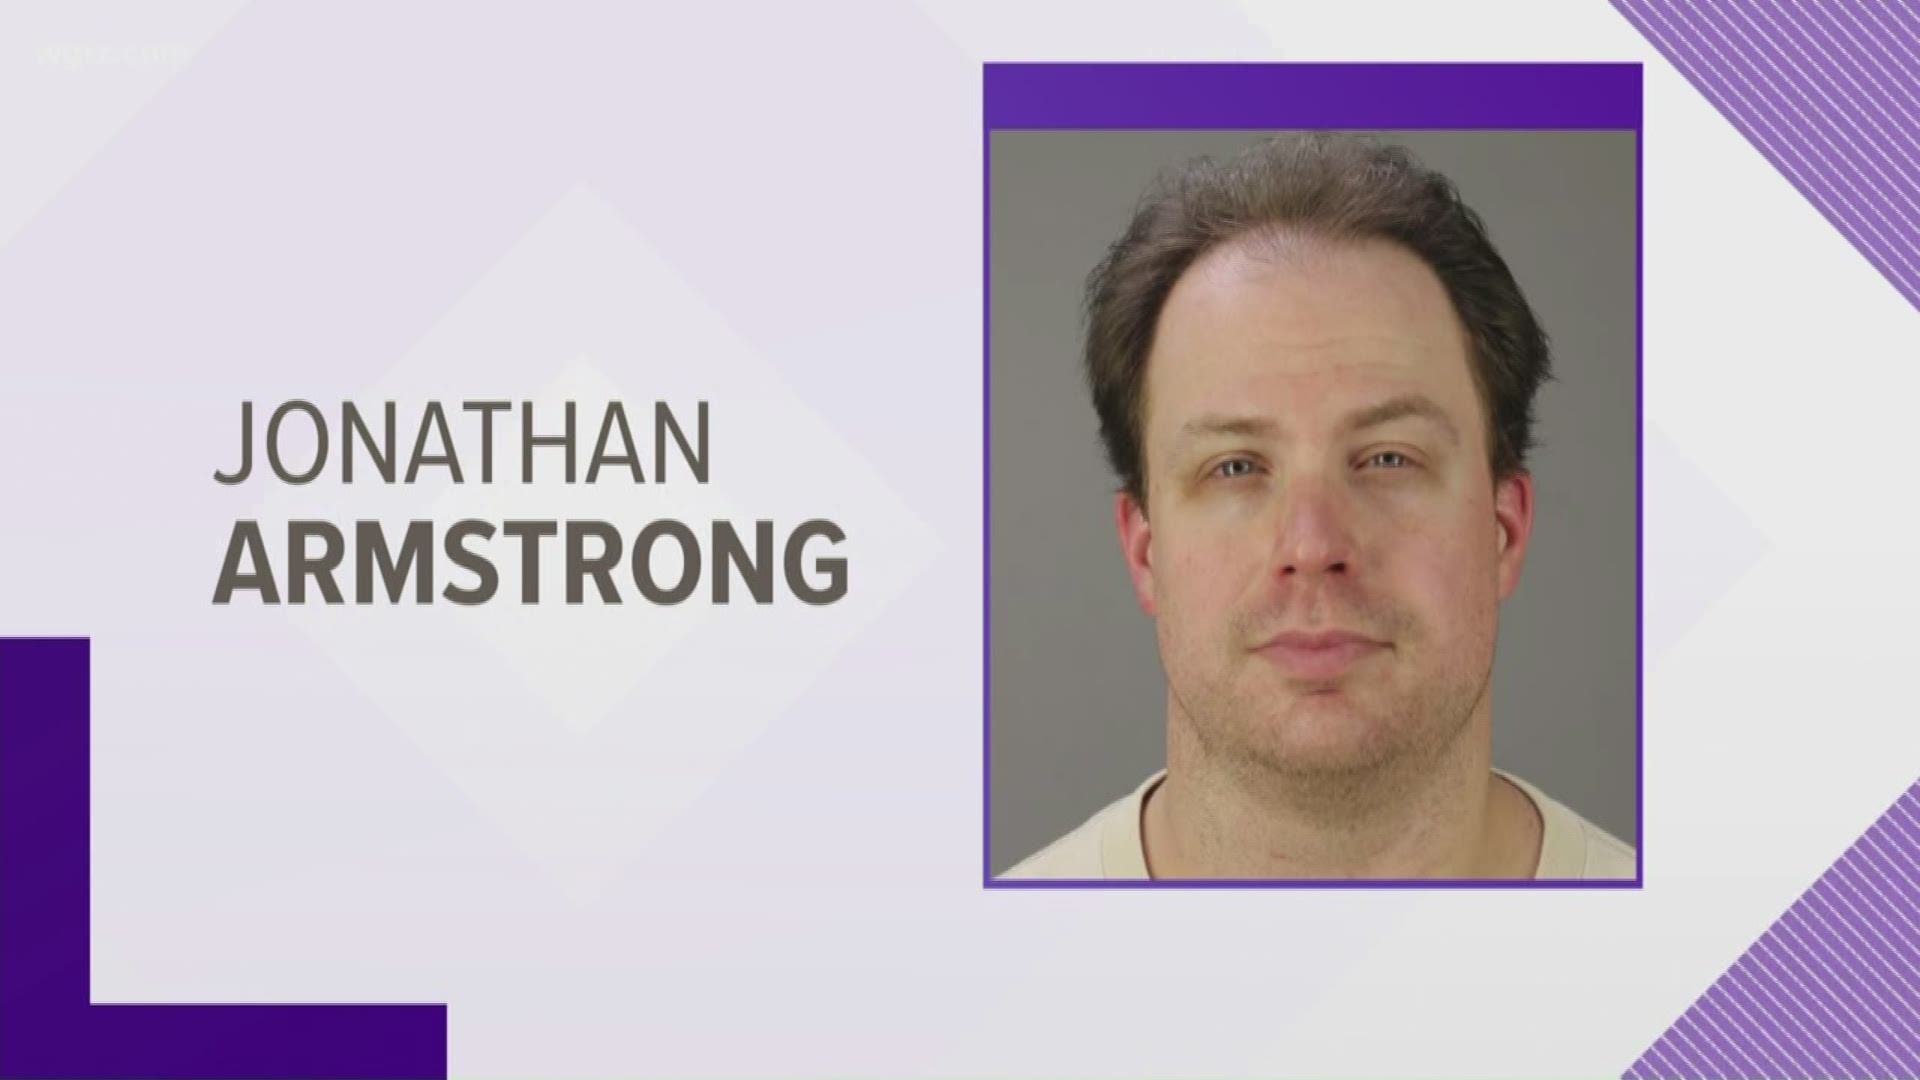 36-year-old Jonathan Armstrong exposed himself to someone near the Eastern Hills Mall.